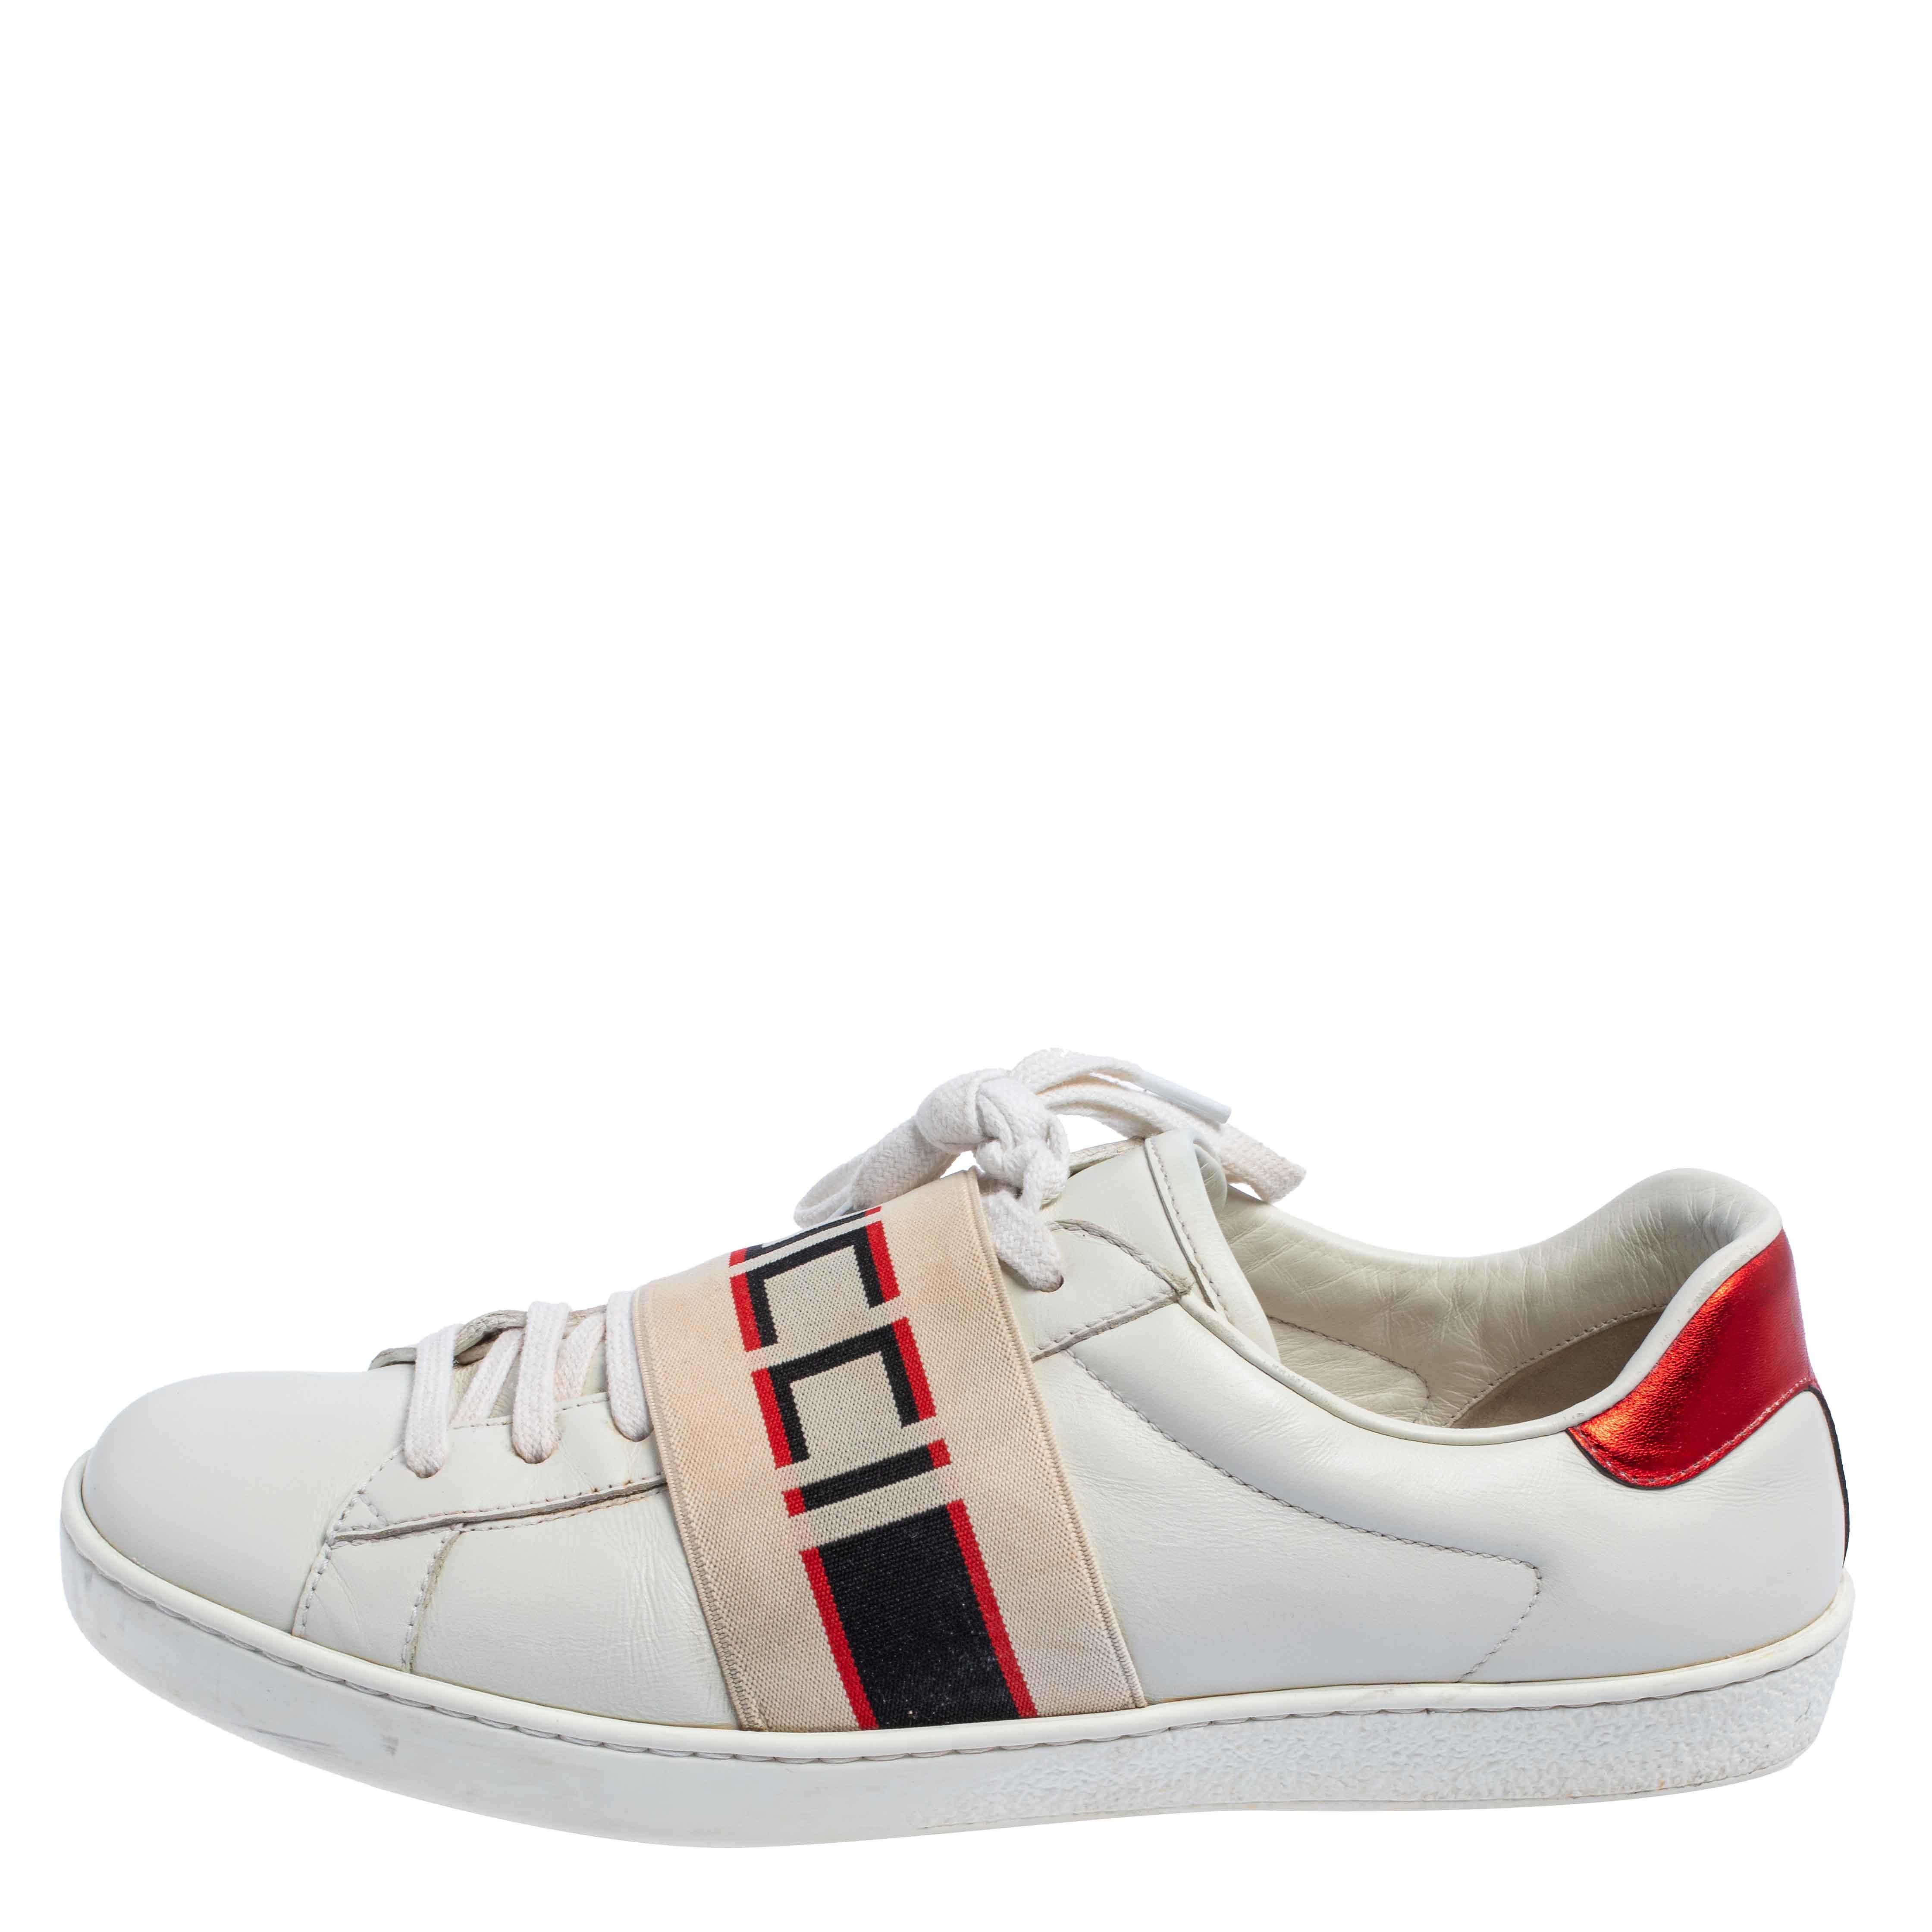 Gray Gucci White/Red Leather Ace Gucci Band Low Top Sneakers Size 42.5